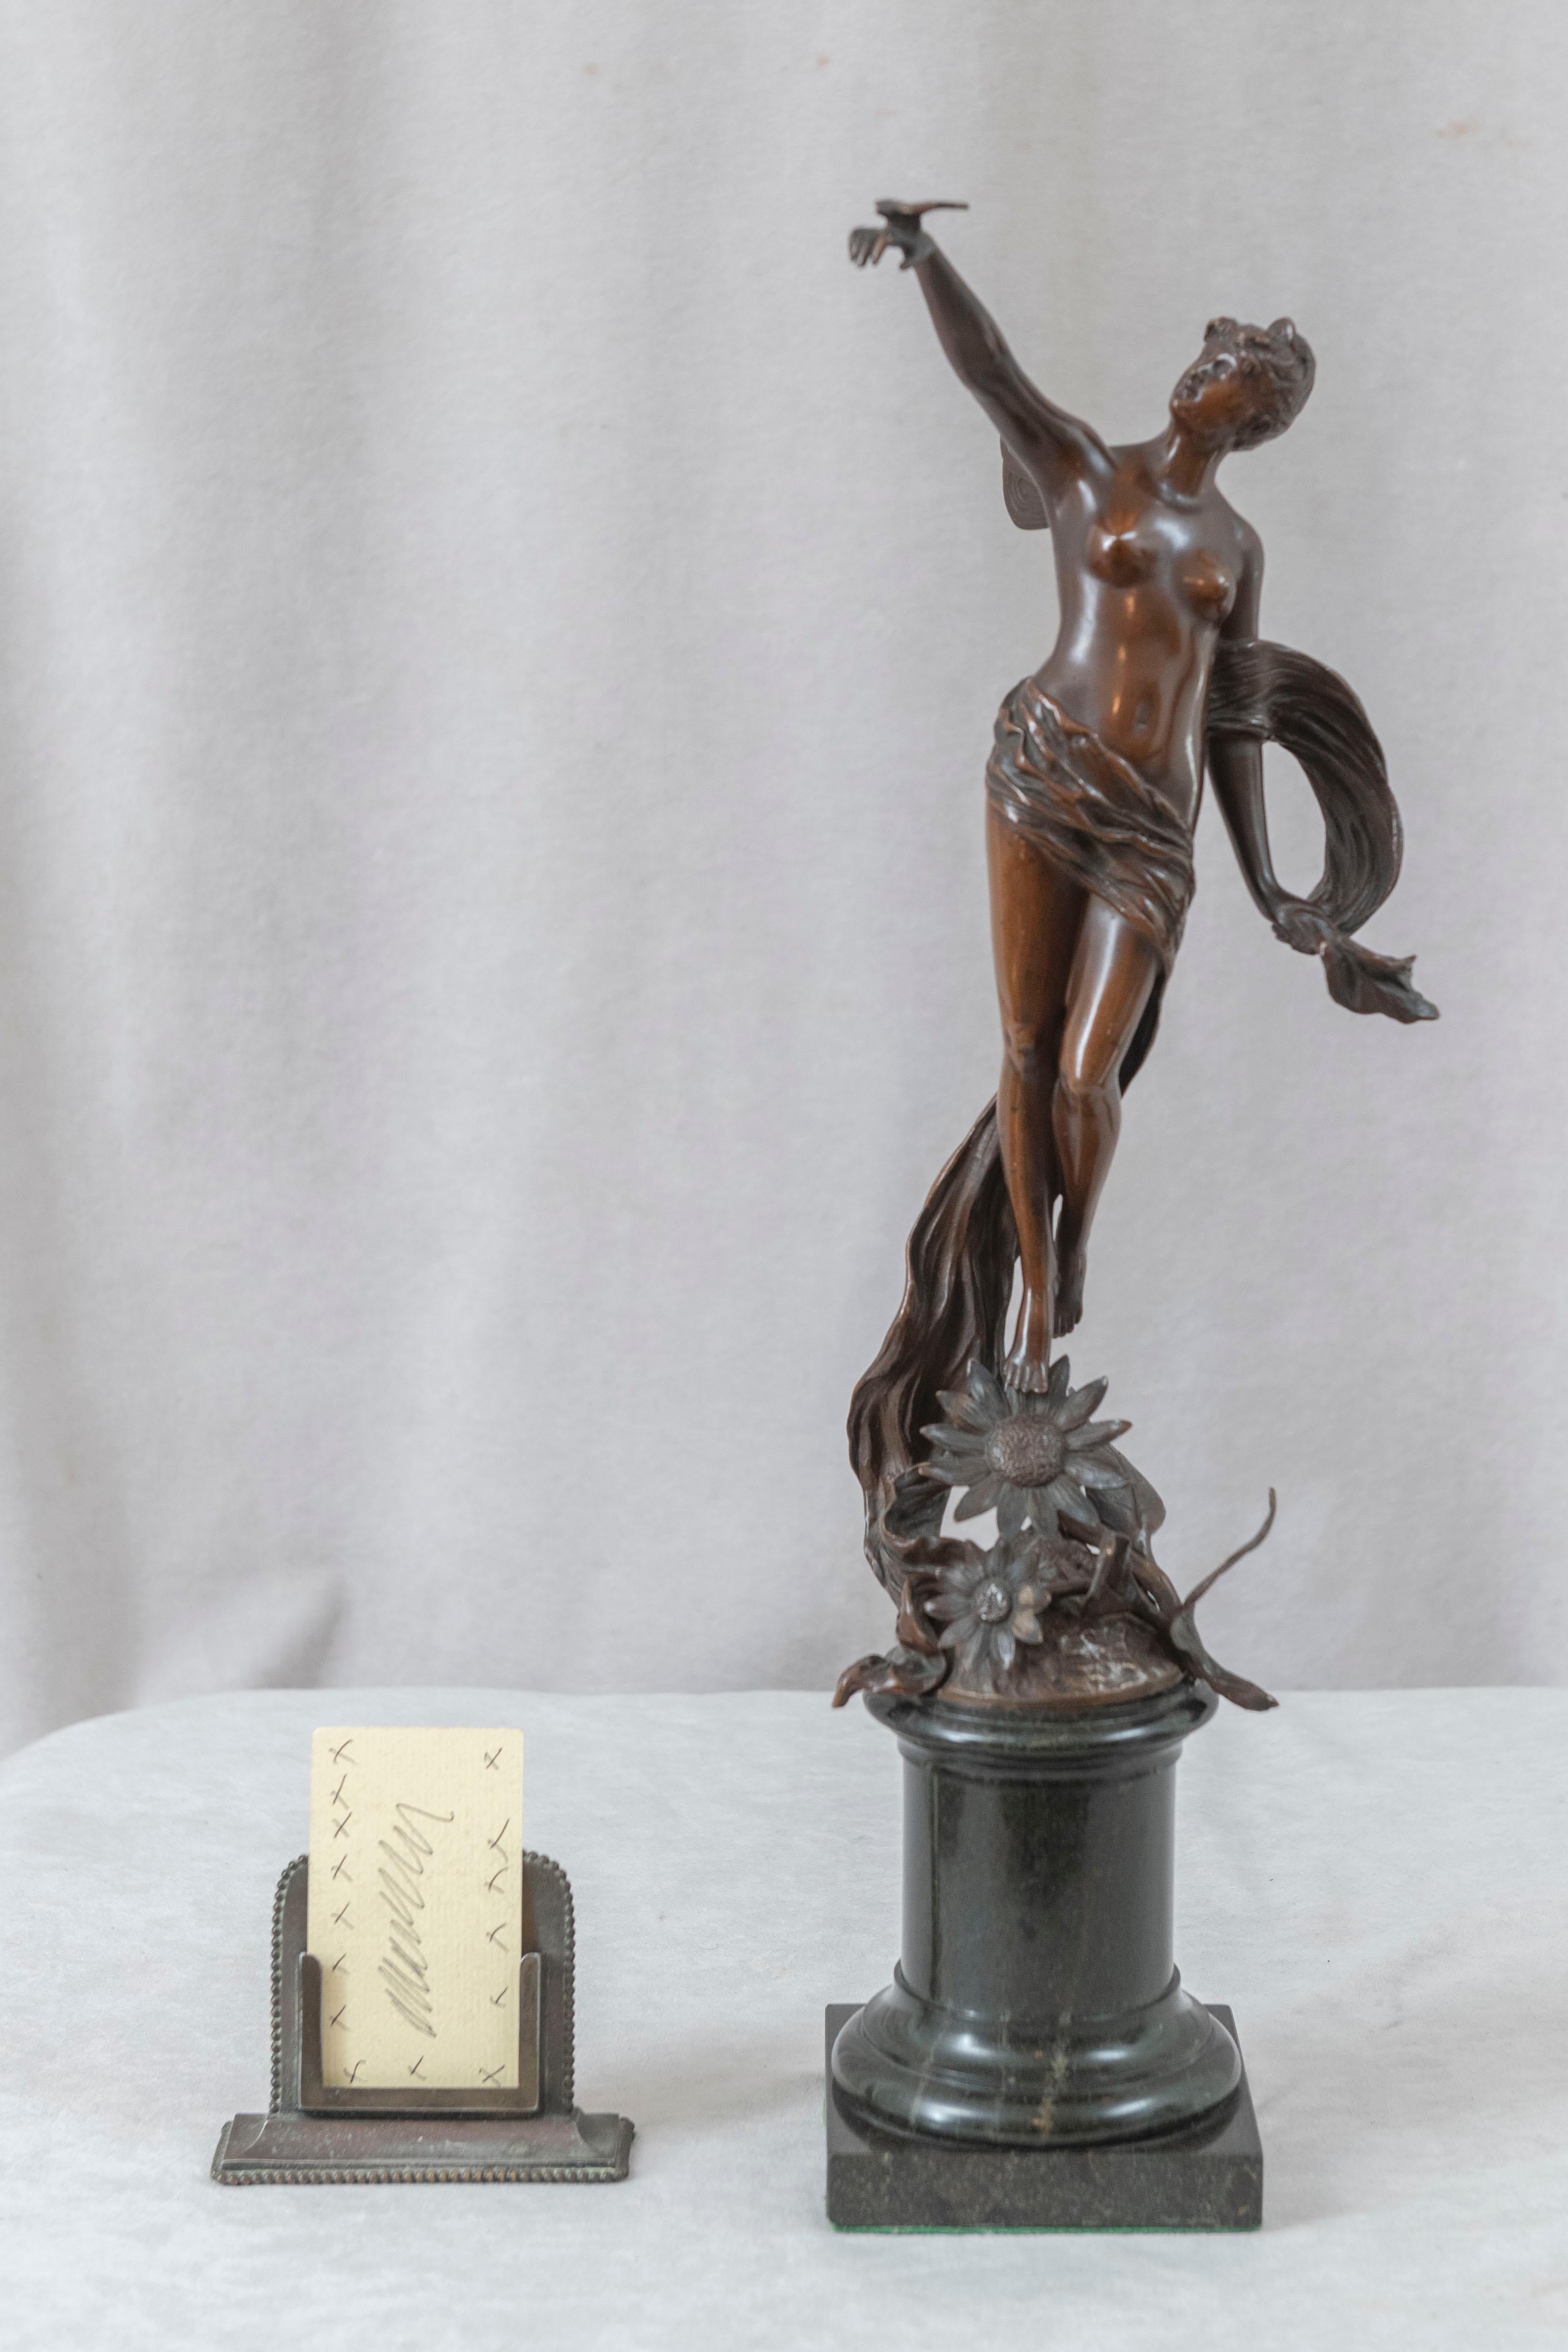  This lovely bronze is the epitome of art nouveau movement. The stylized nature themes, flowers, movement, and a young girl who has butterfly wings and is holding a bird in her hand. The return to nature is what is a predominant theme of art